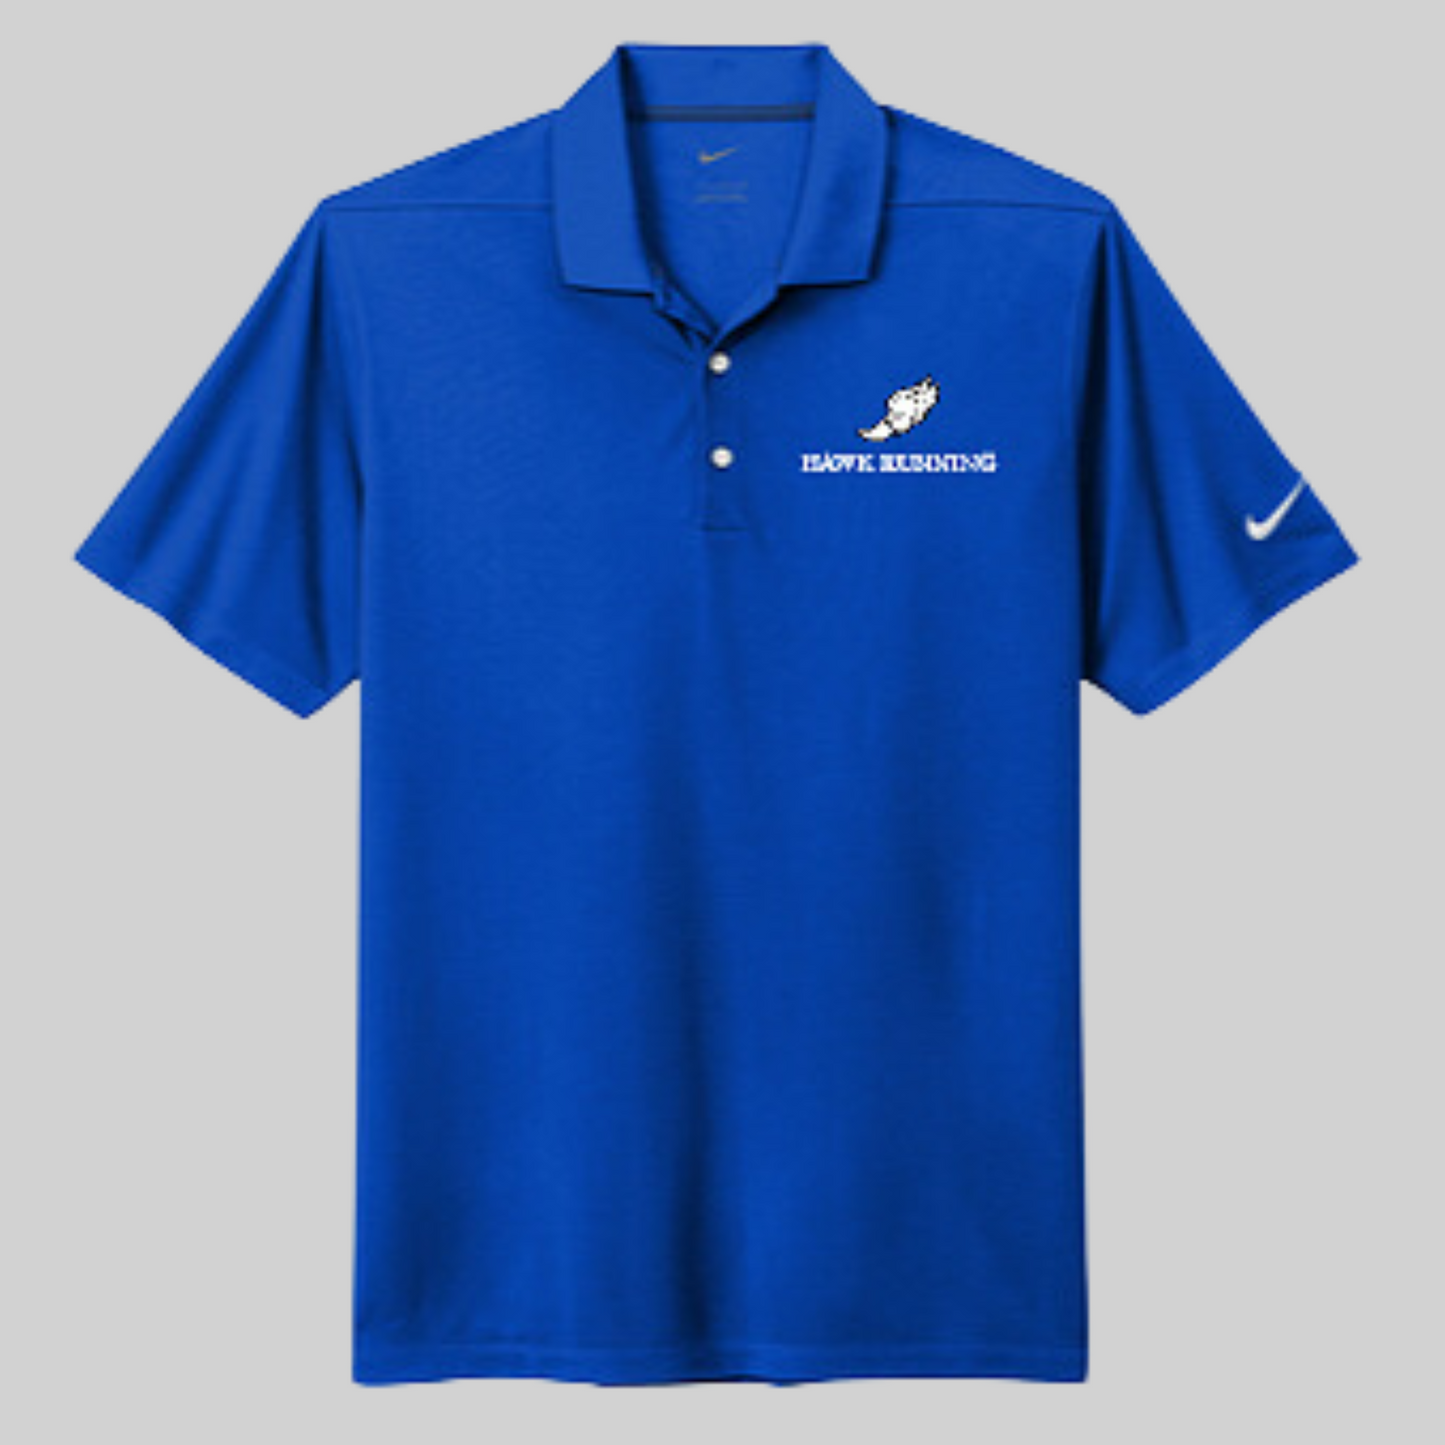 Hebron High School Cross Country/ Track and Field Polo